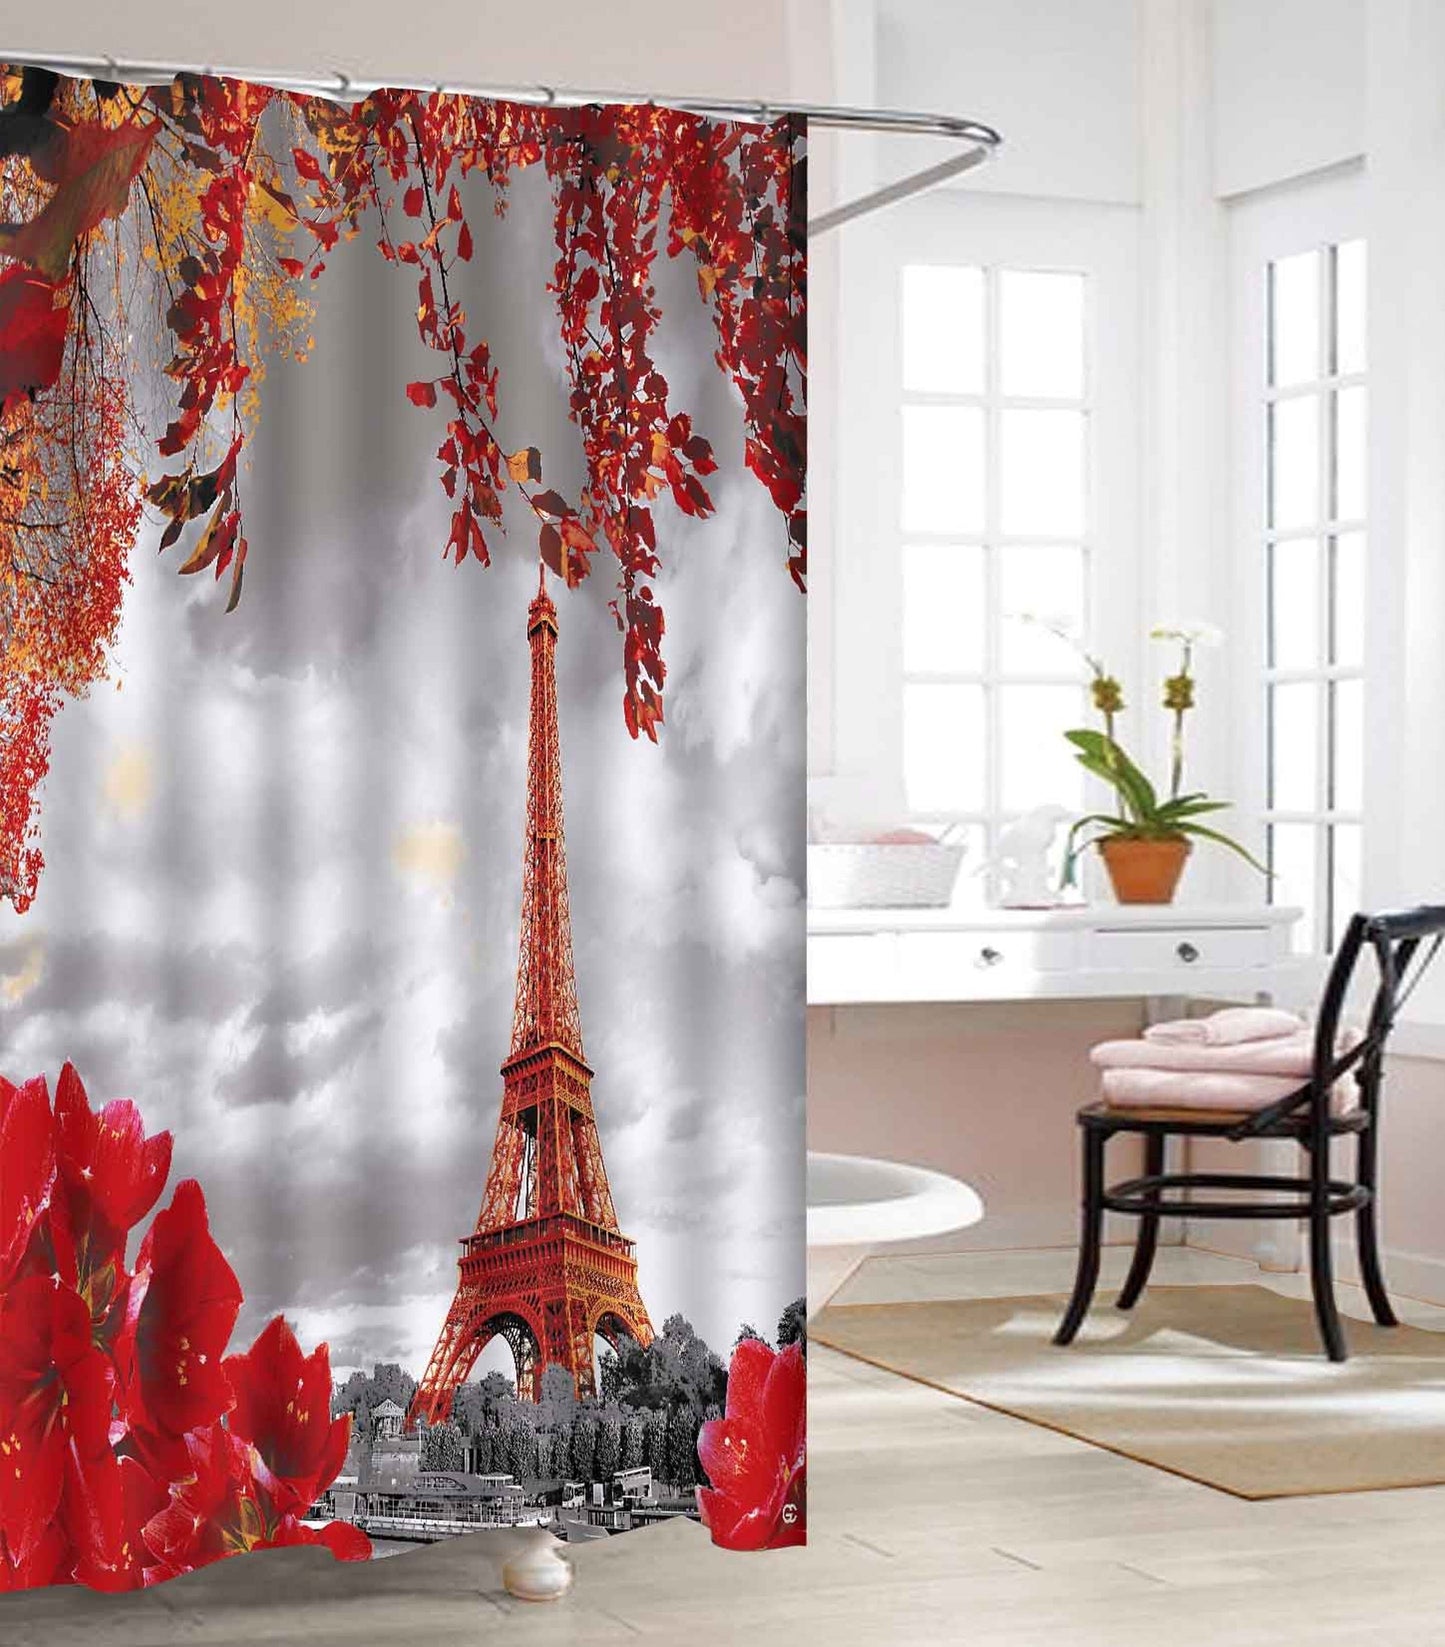 Elegant Comfort Vinyl Waterproof Shower Curtain - 3D Graphic Printed and Clear